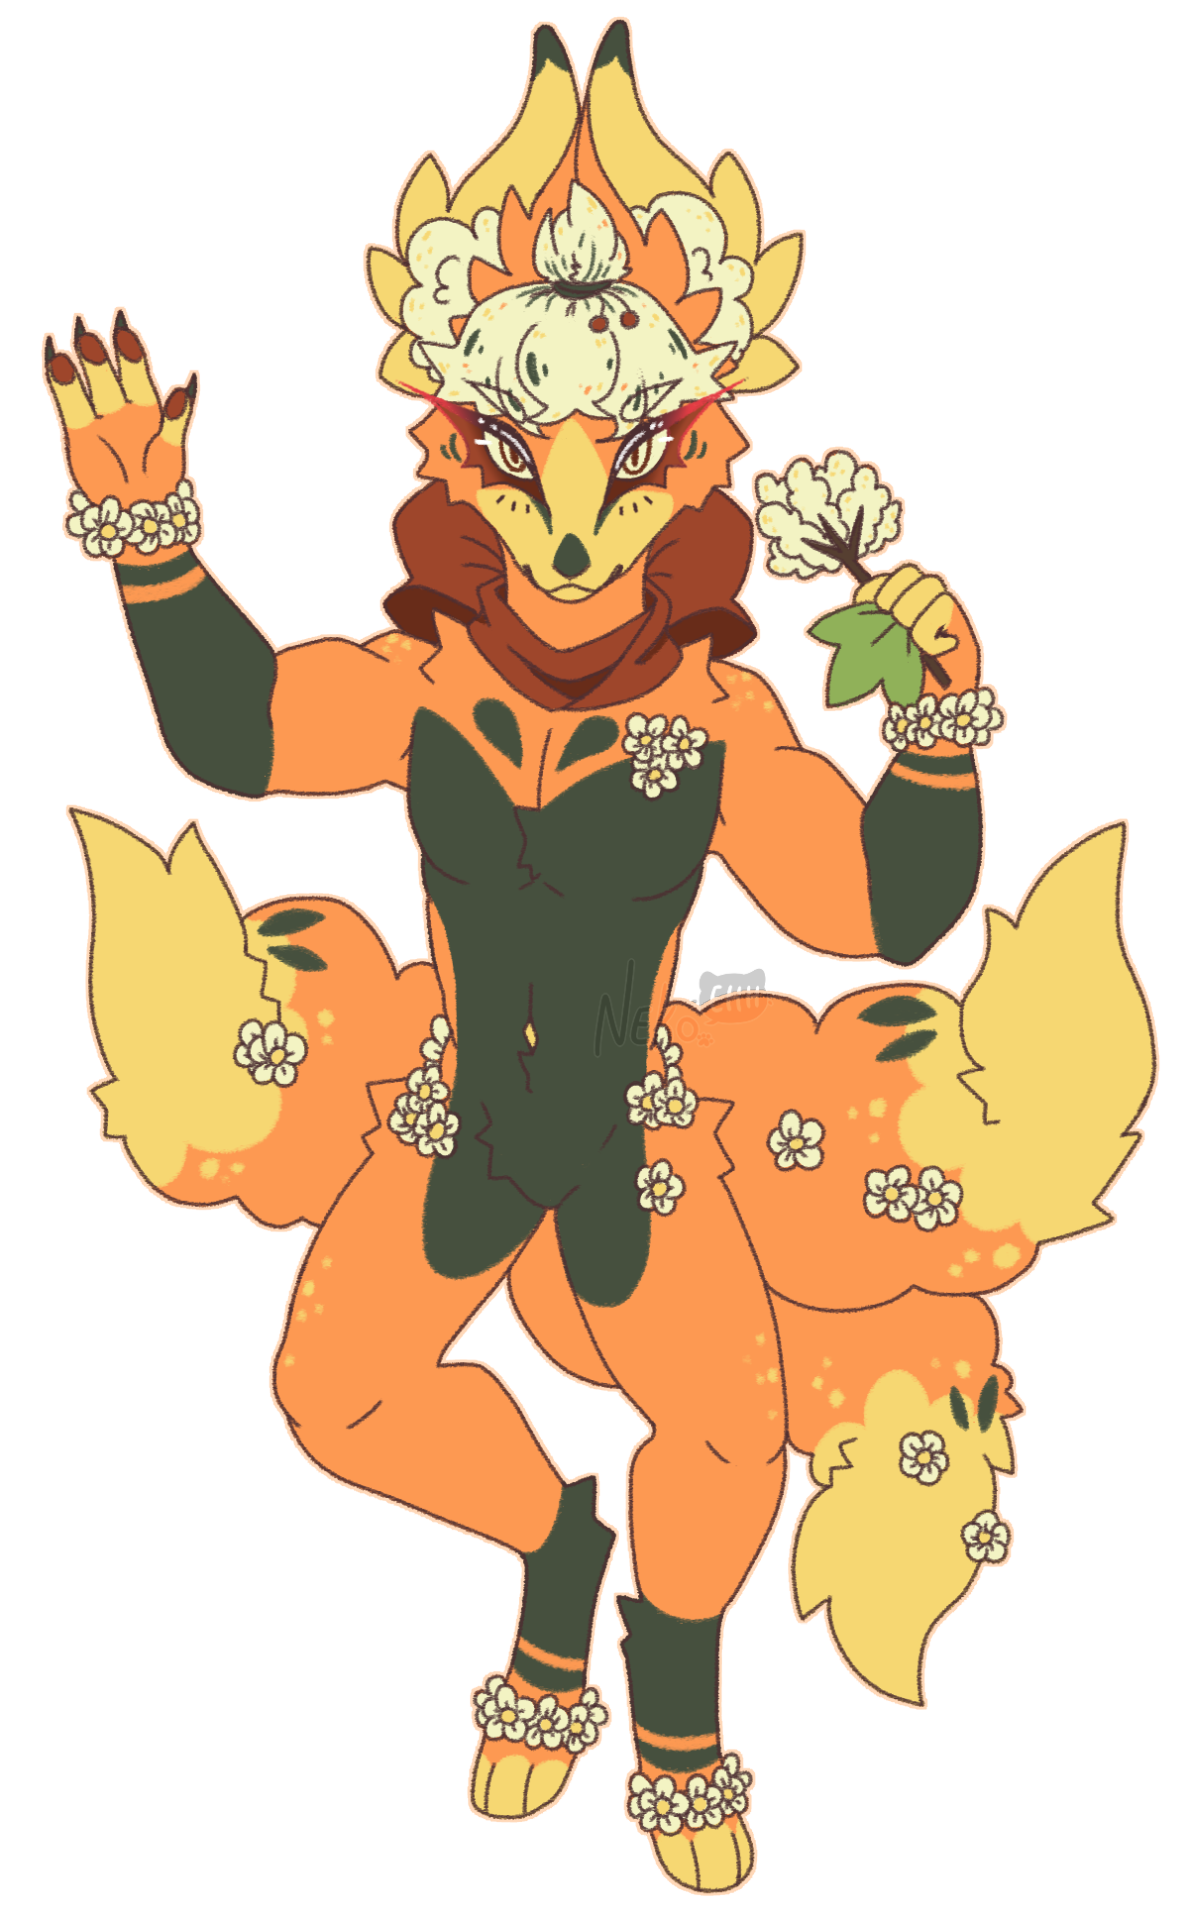 Fio all grown-up! AAA I LOVE HIM SO MUCH ;;
Fio is a Kikitsu, and is part of a closed species ARPG by @lythbound !
Please do not make your own!